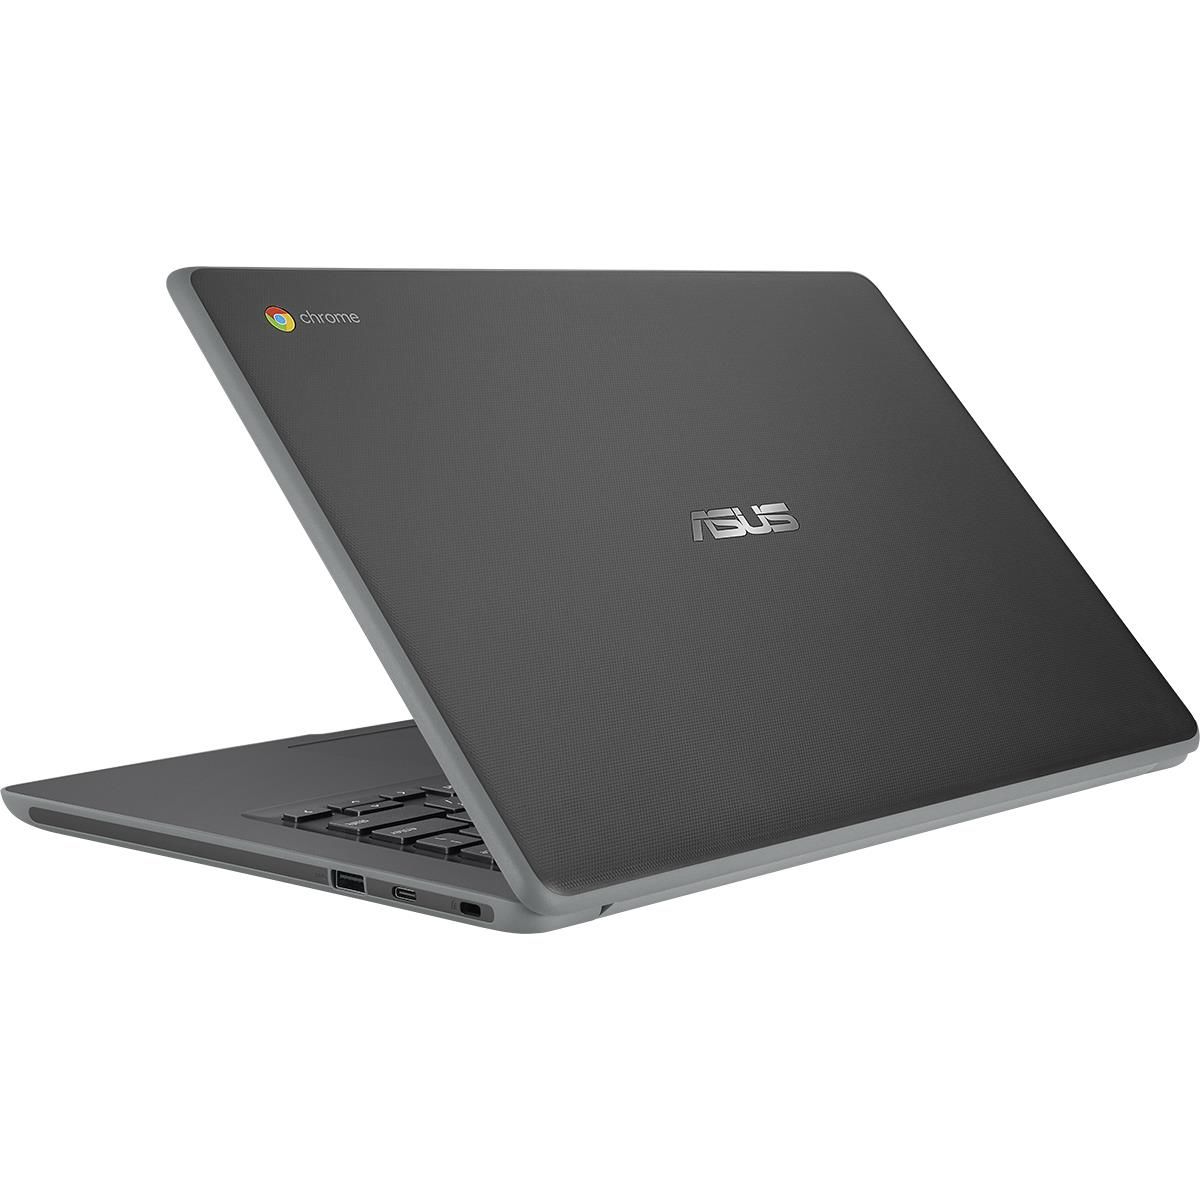 ASUS Chromebook C403NA - 90NX01P1-M00320 laptop specifications